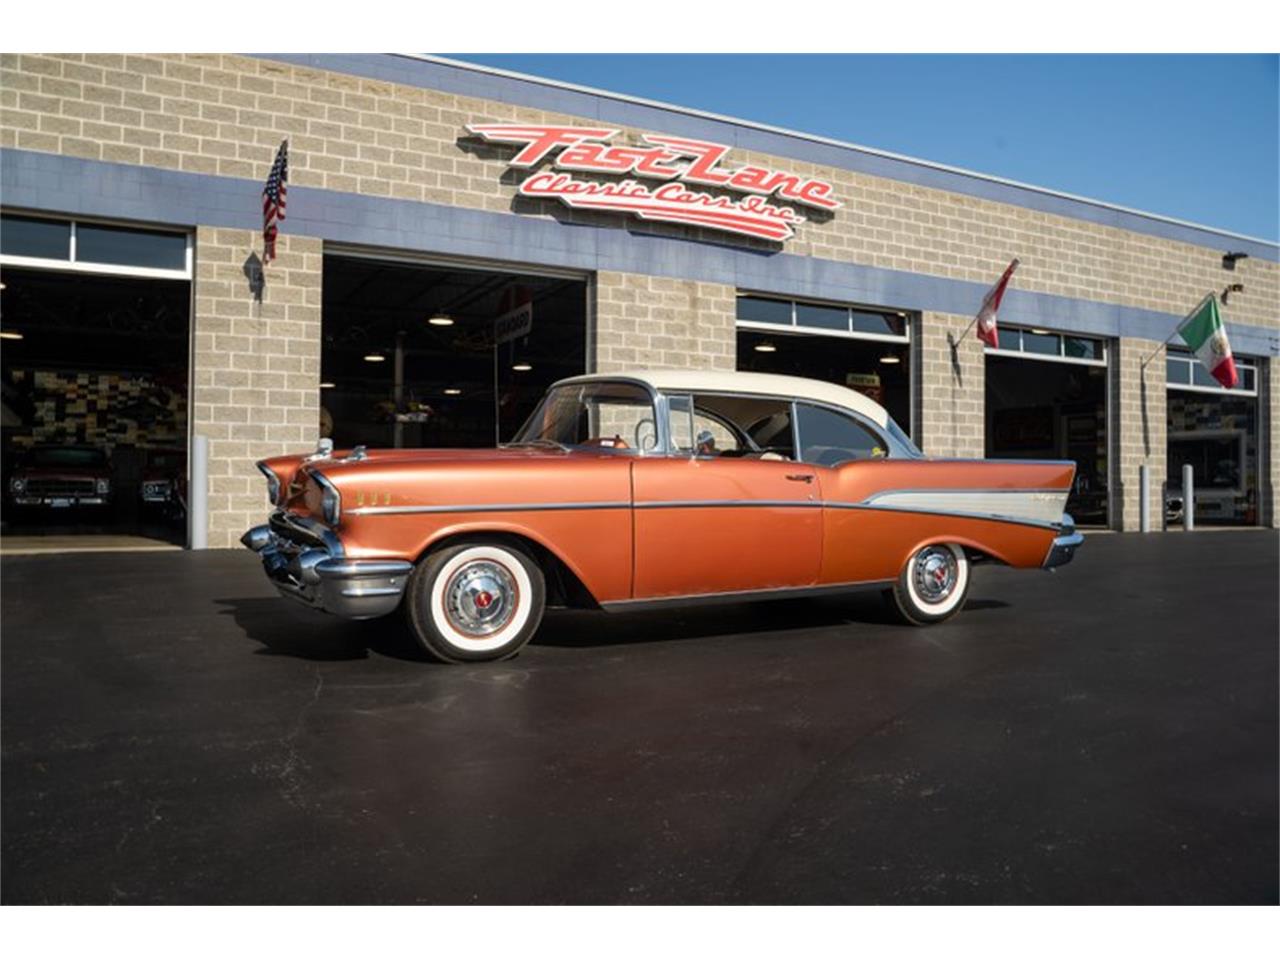 For Sale: 1957 Chevrolet Bel Air in St. Charles, Missouri for sale in Saint Charles, MO